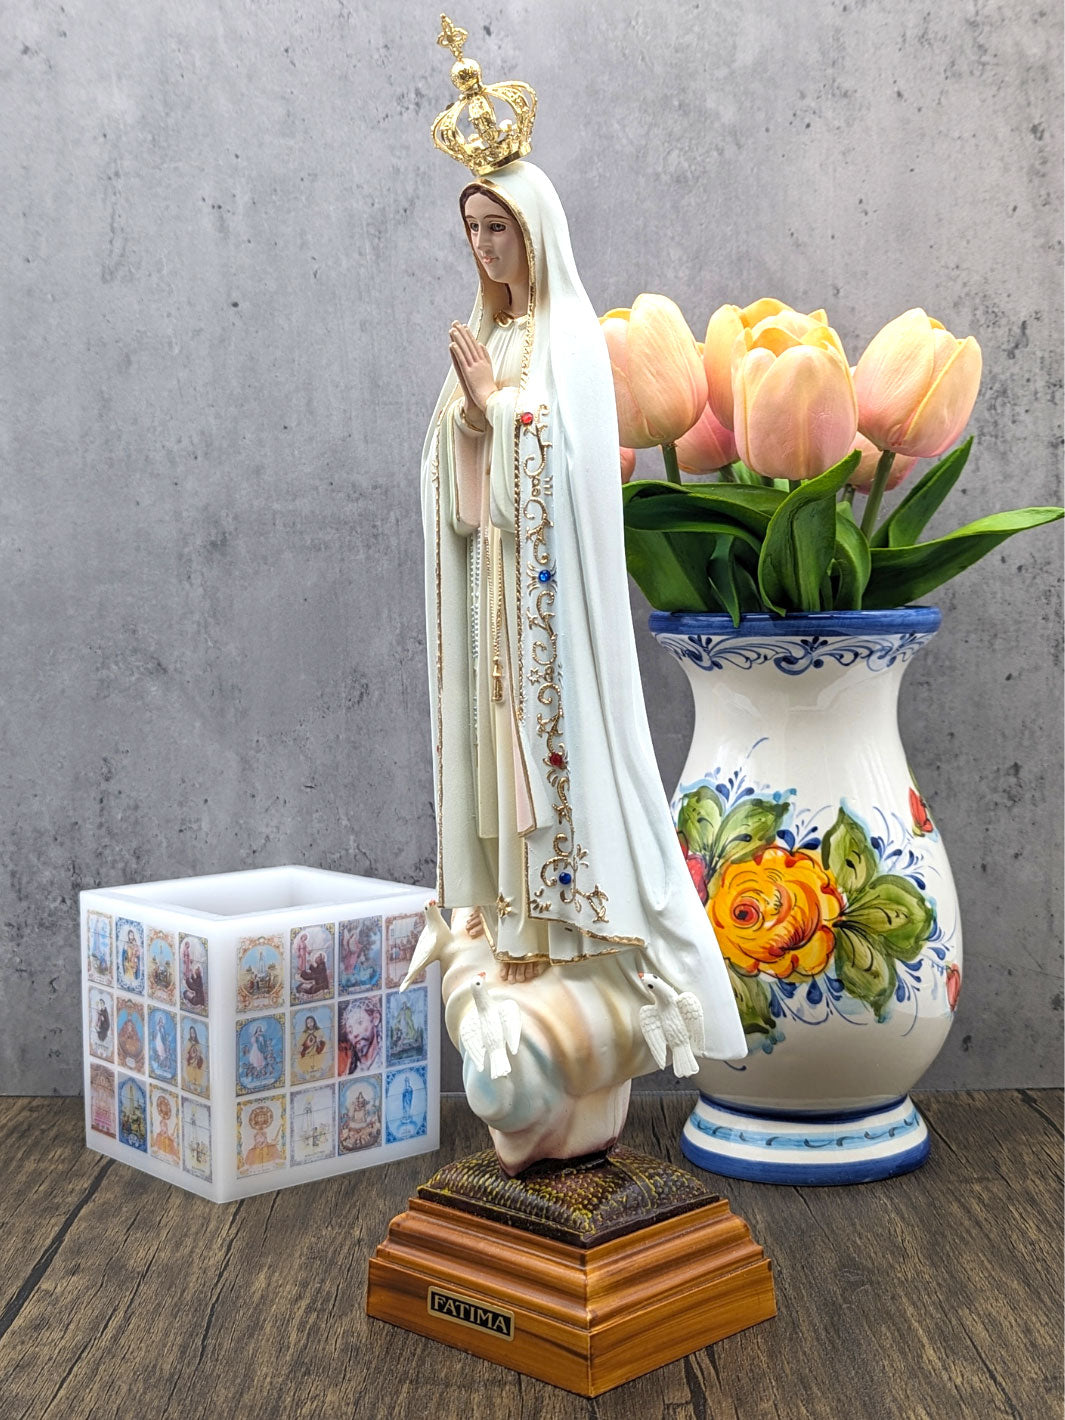 17 Inch Glass Eyes Our Lady of Fatima Statue Made in Portugal